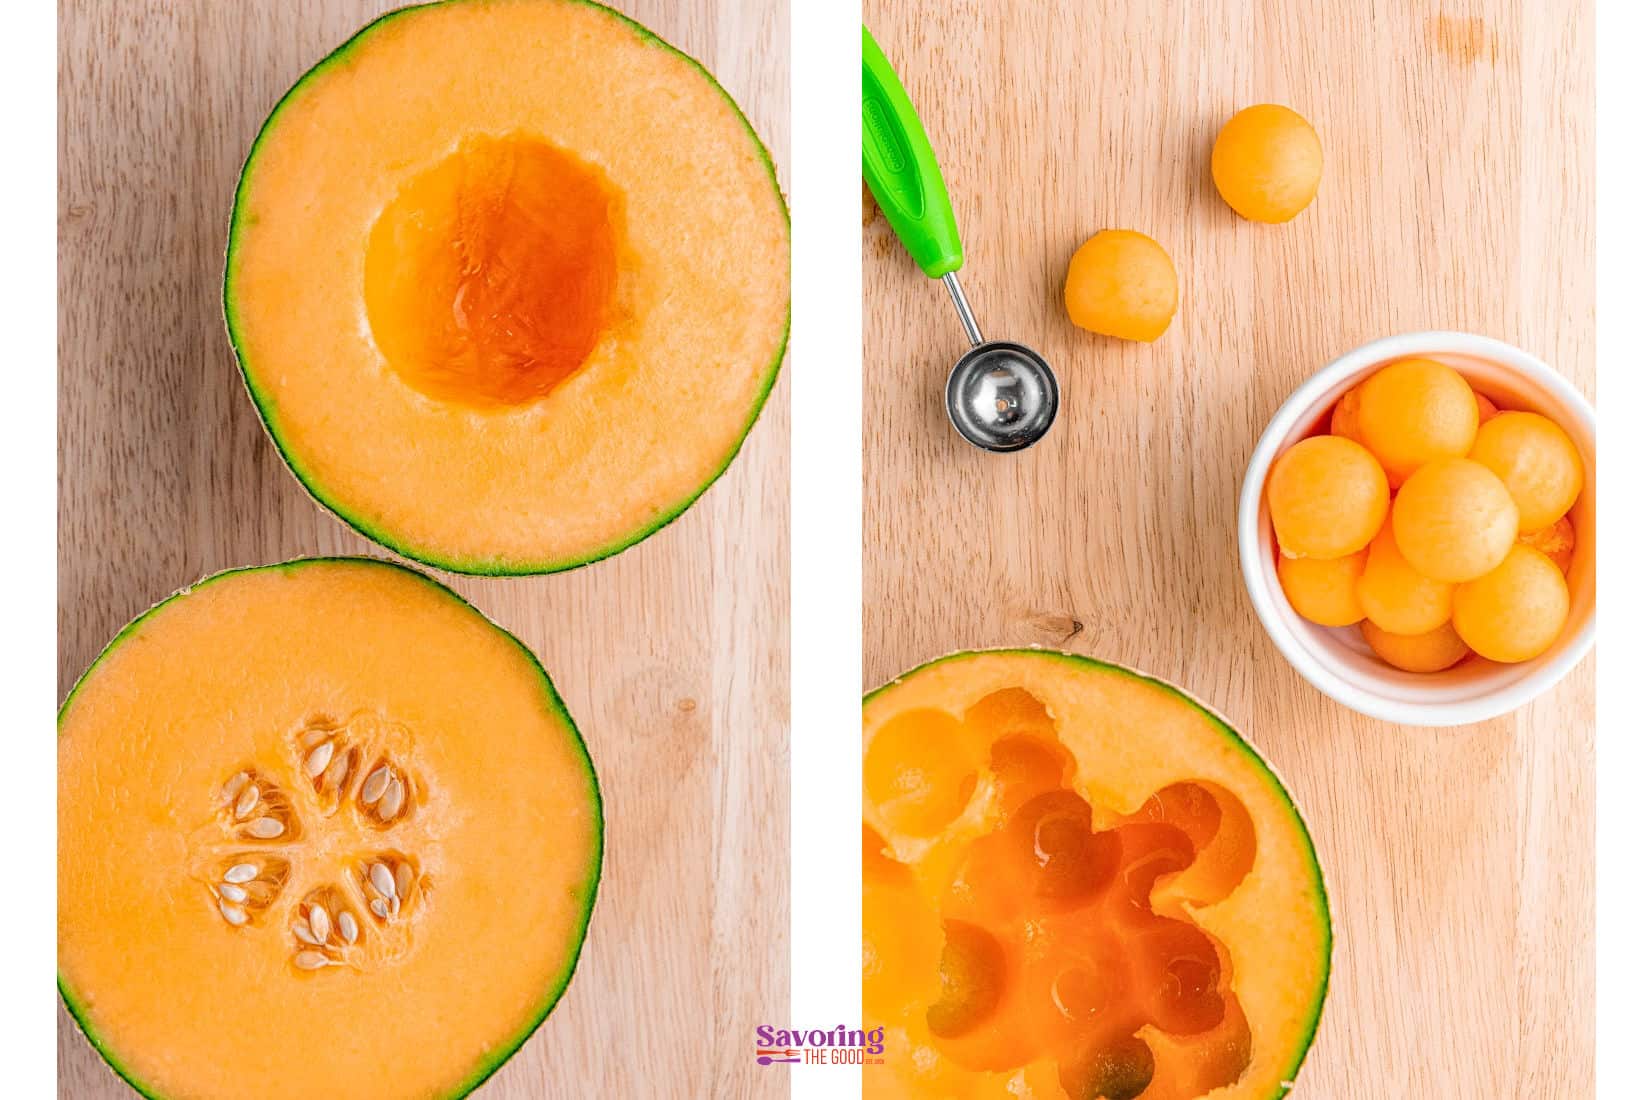 How to cut a cantaloupe for Prosciutto vs melon - the difference between prosciutto and melon.